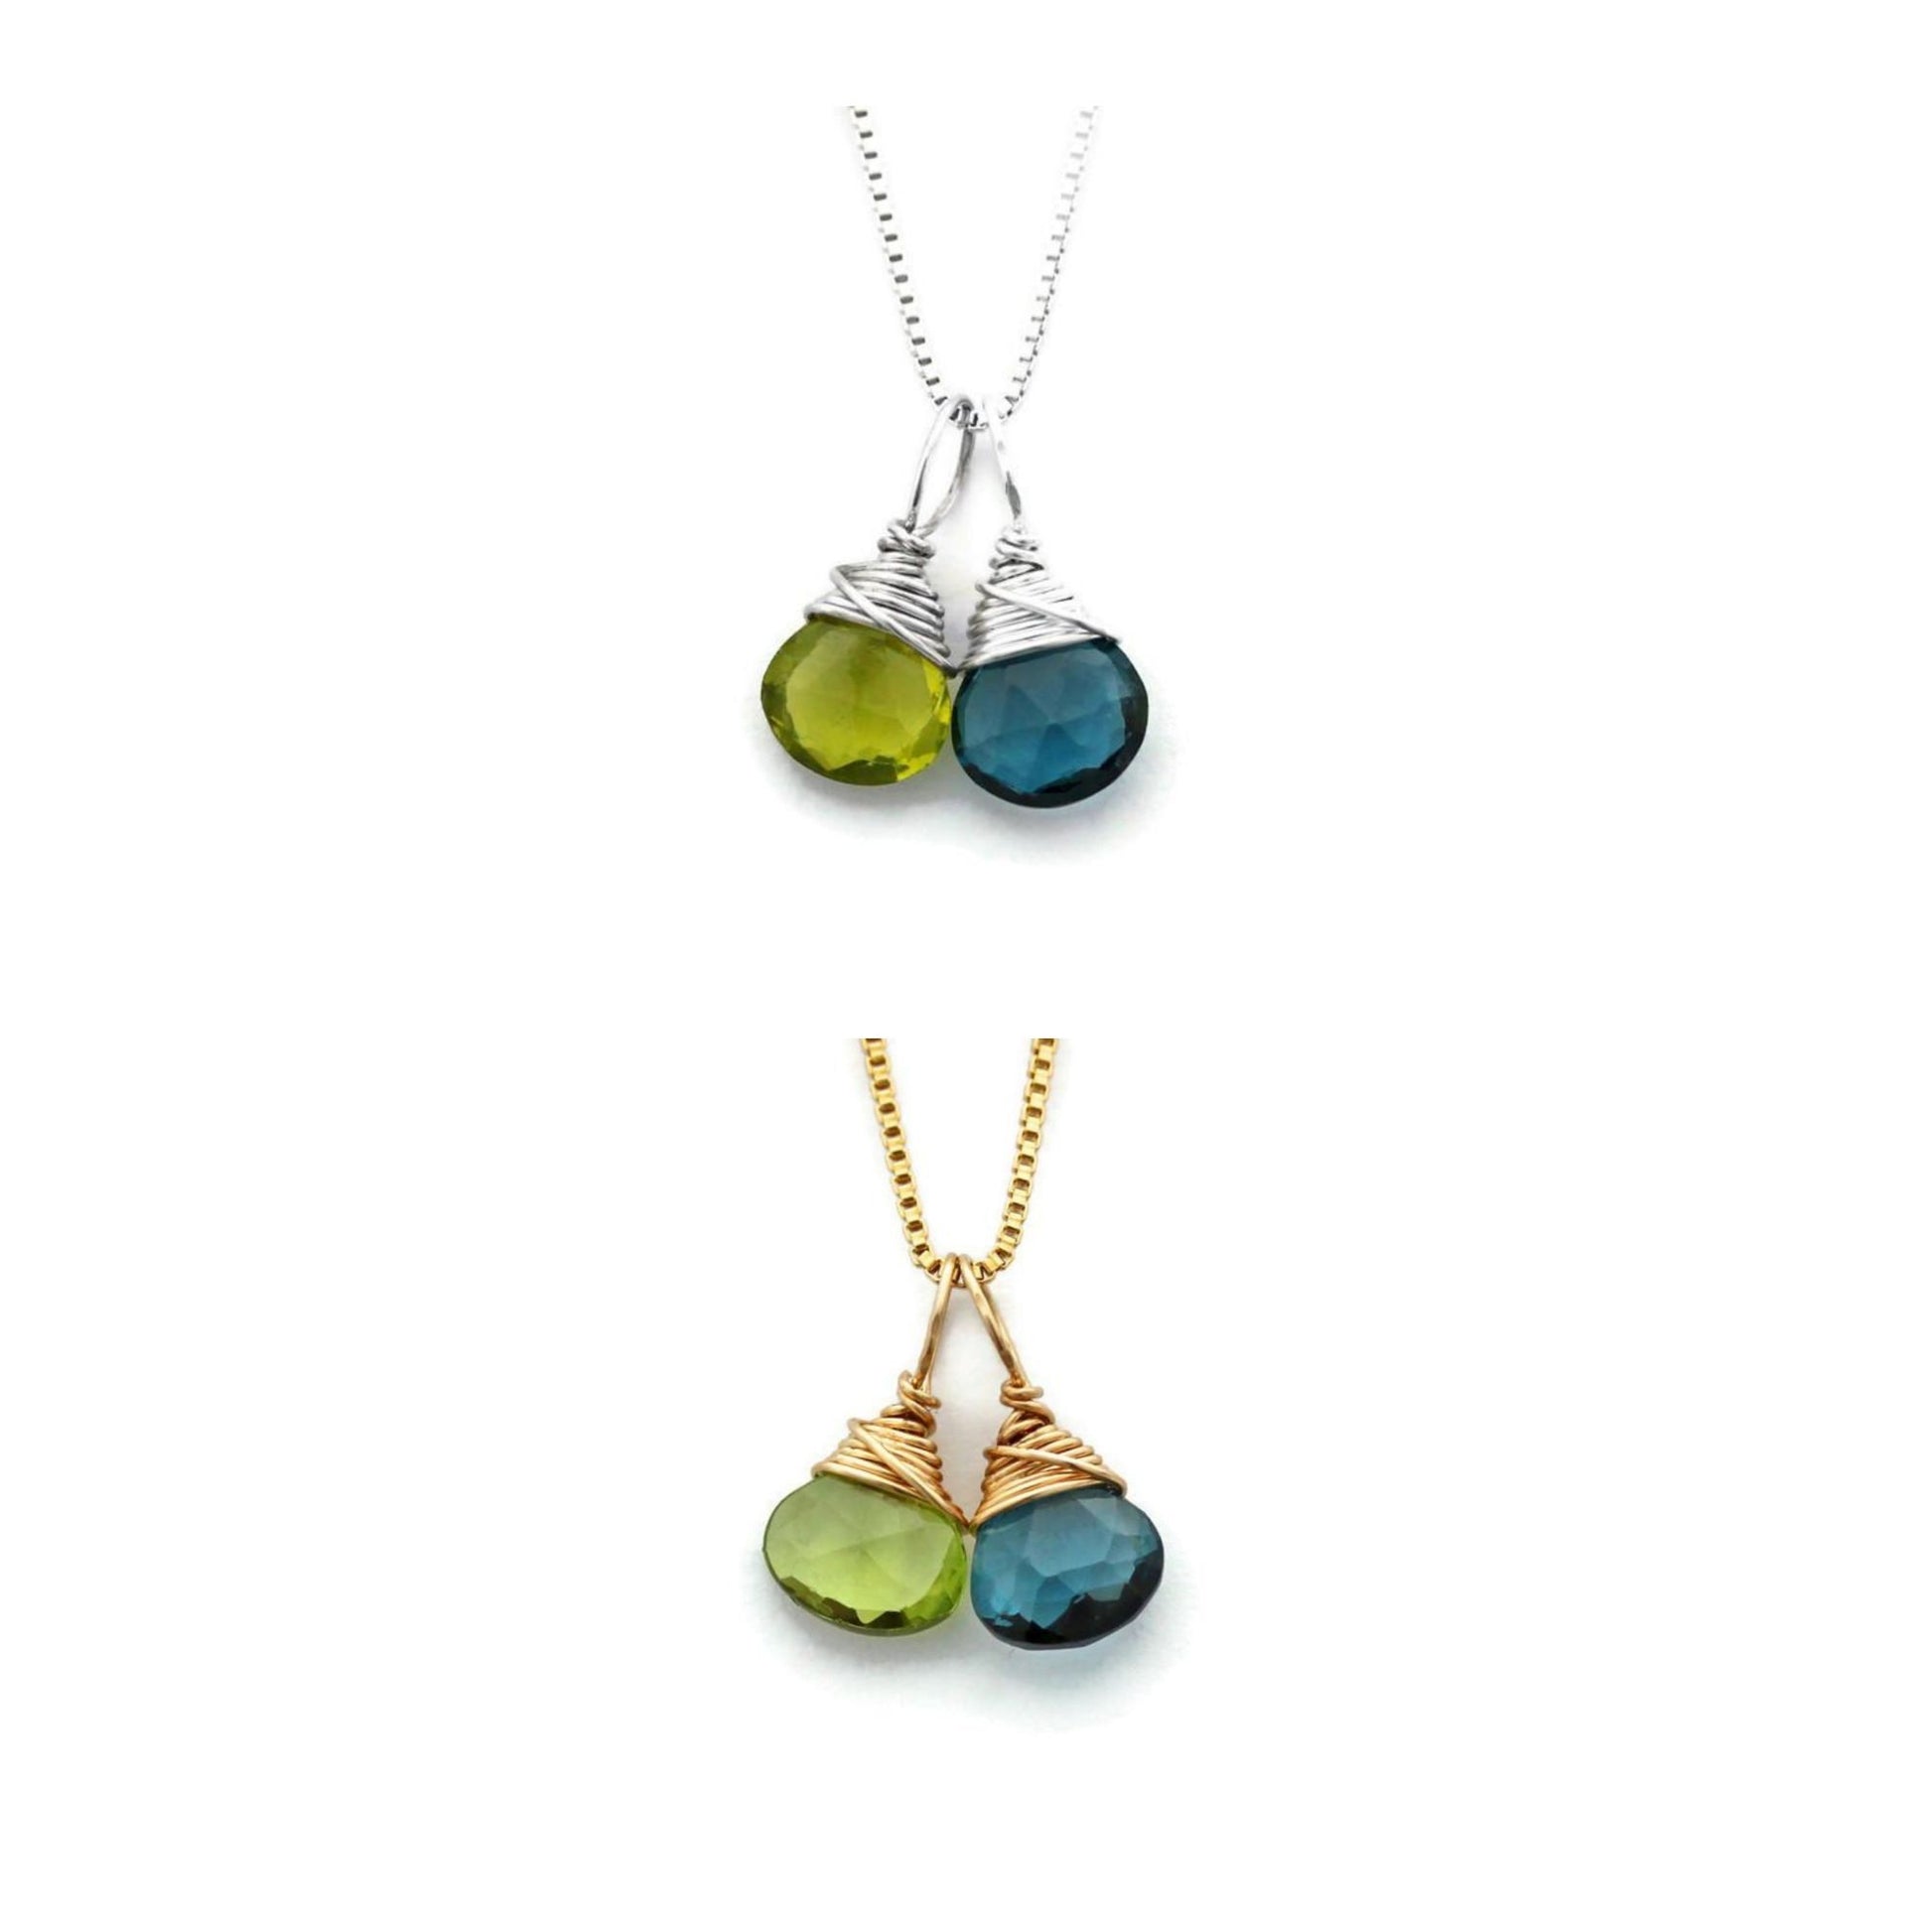 2 birthstone mom necklaces by Jen Lesea Designs